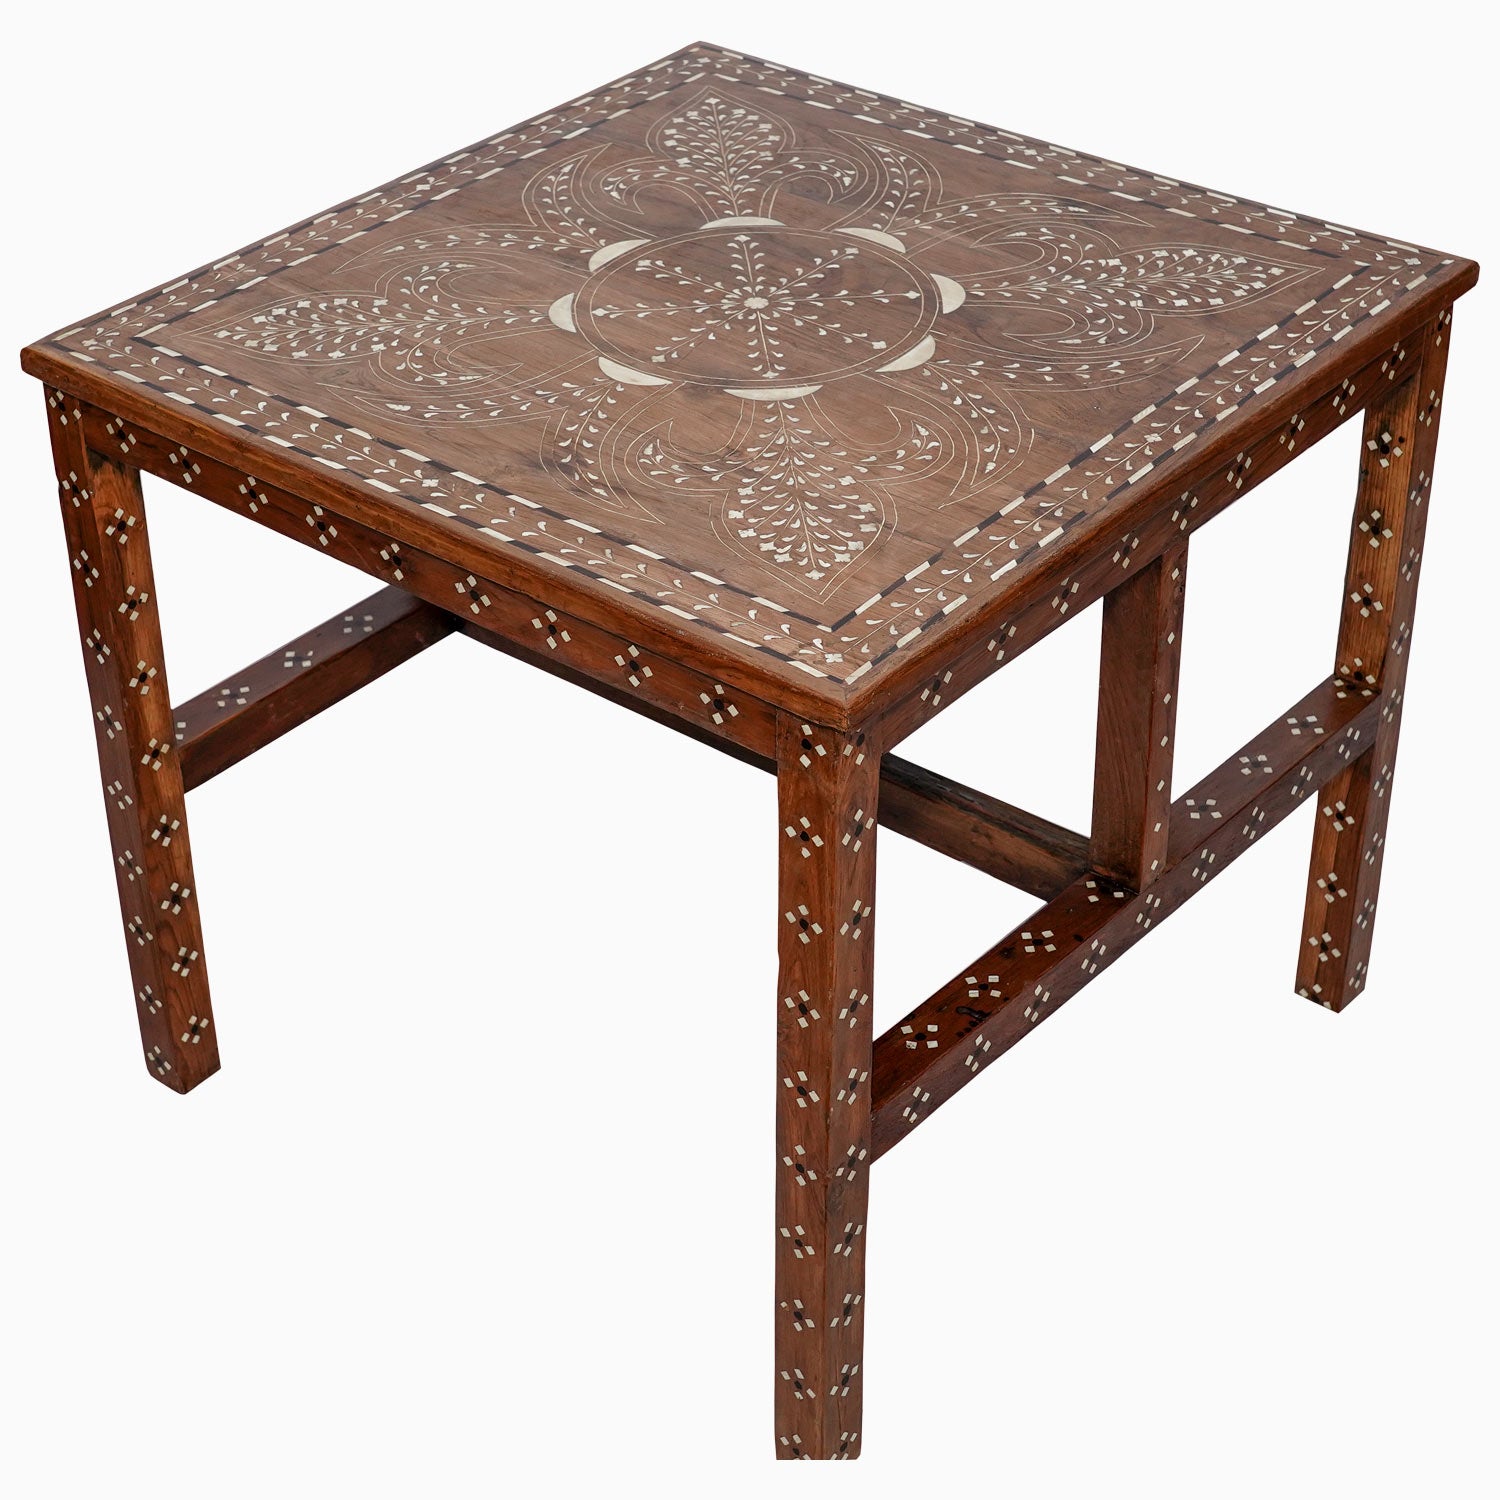 Wooden Inlay Table 4 Main